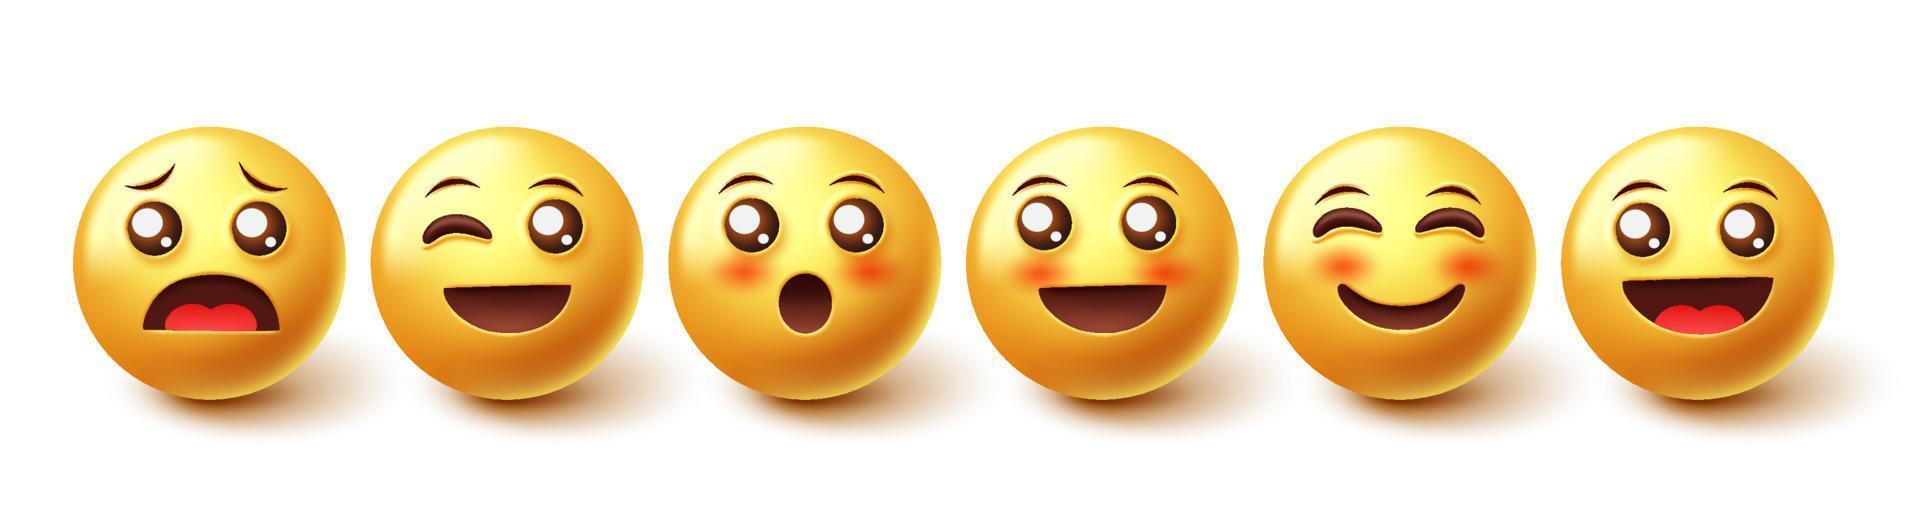 Emoji characters vector set. Emojis happy characters in 3d graphic design isolated in white background for emoticons facial mood and expression collection. Vector illustration.